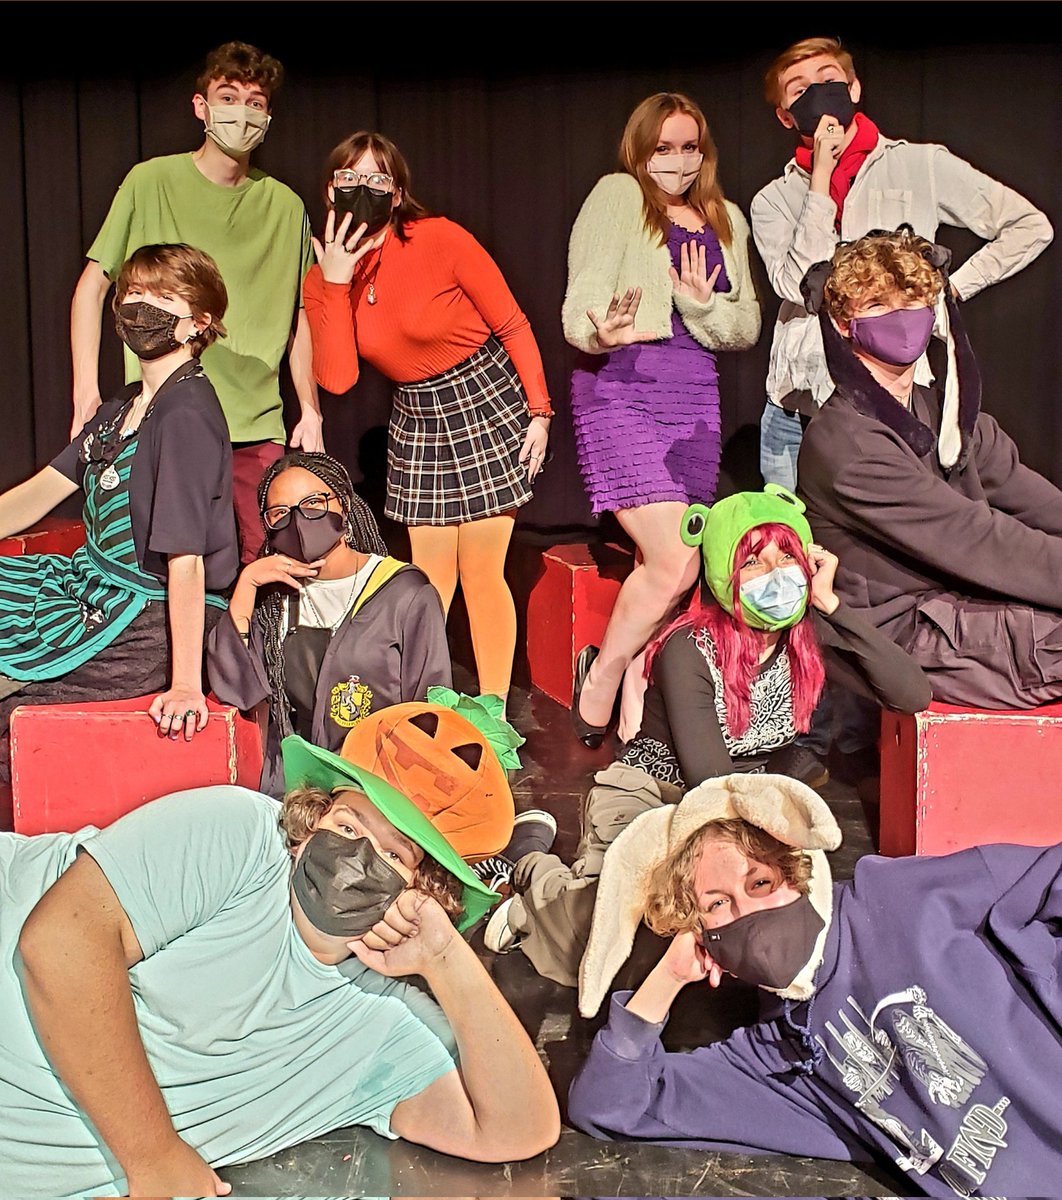 Happy Halloween from @HalifaxWestHS Improv Team! Thank you @HRCEFineArts for supporting this year's Nova Scotia @CanadianImprov Teams! @WestStudentGov